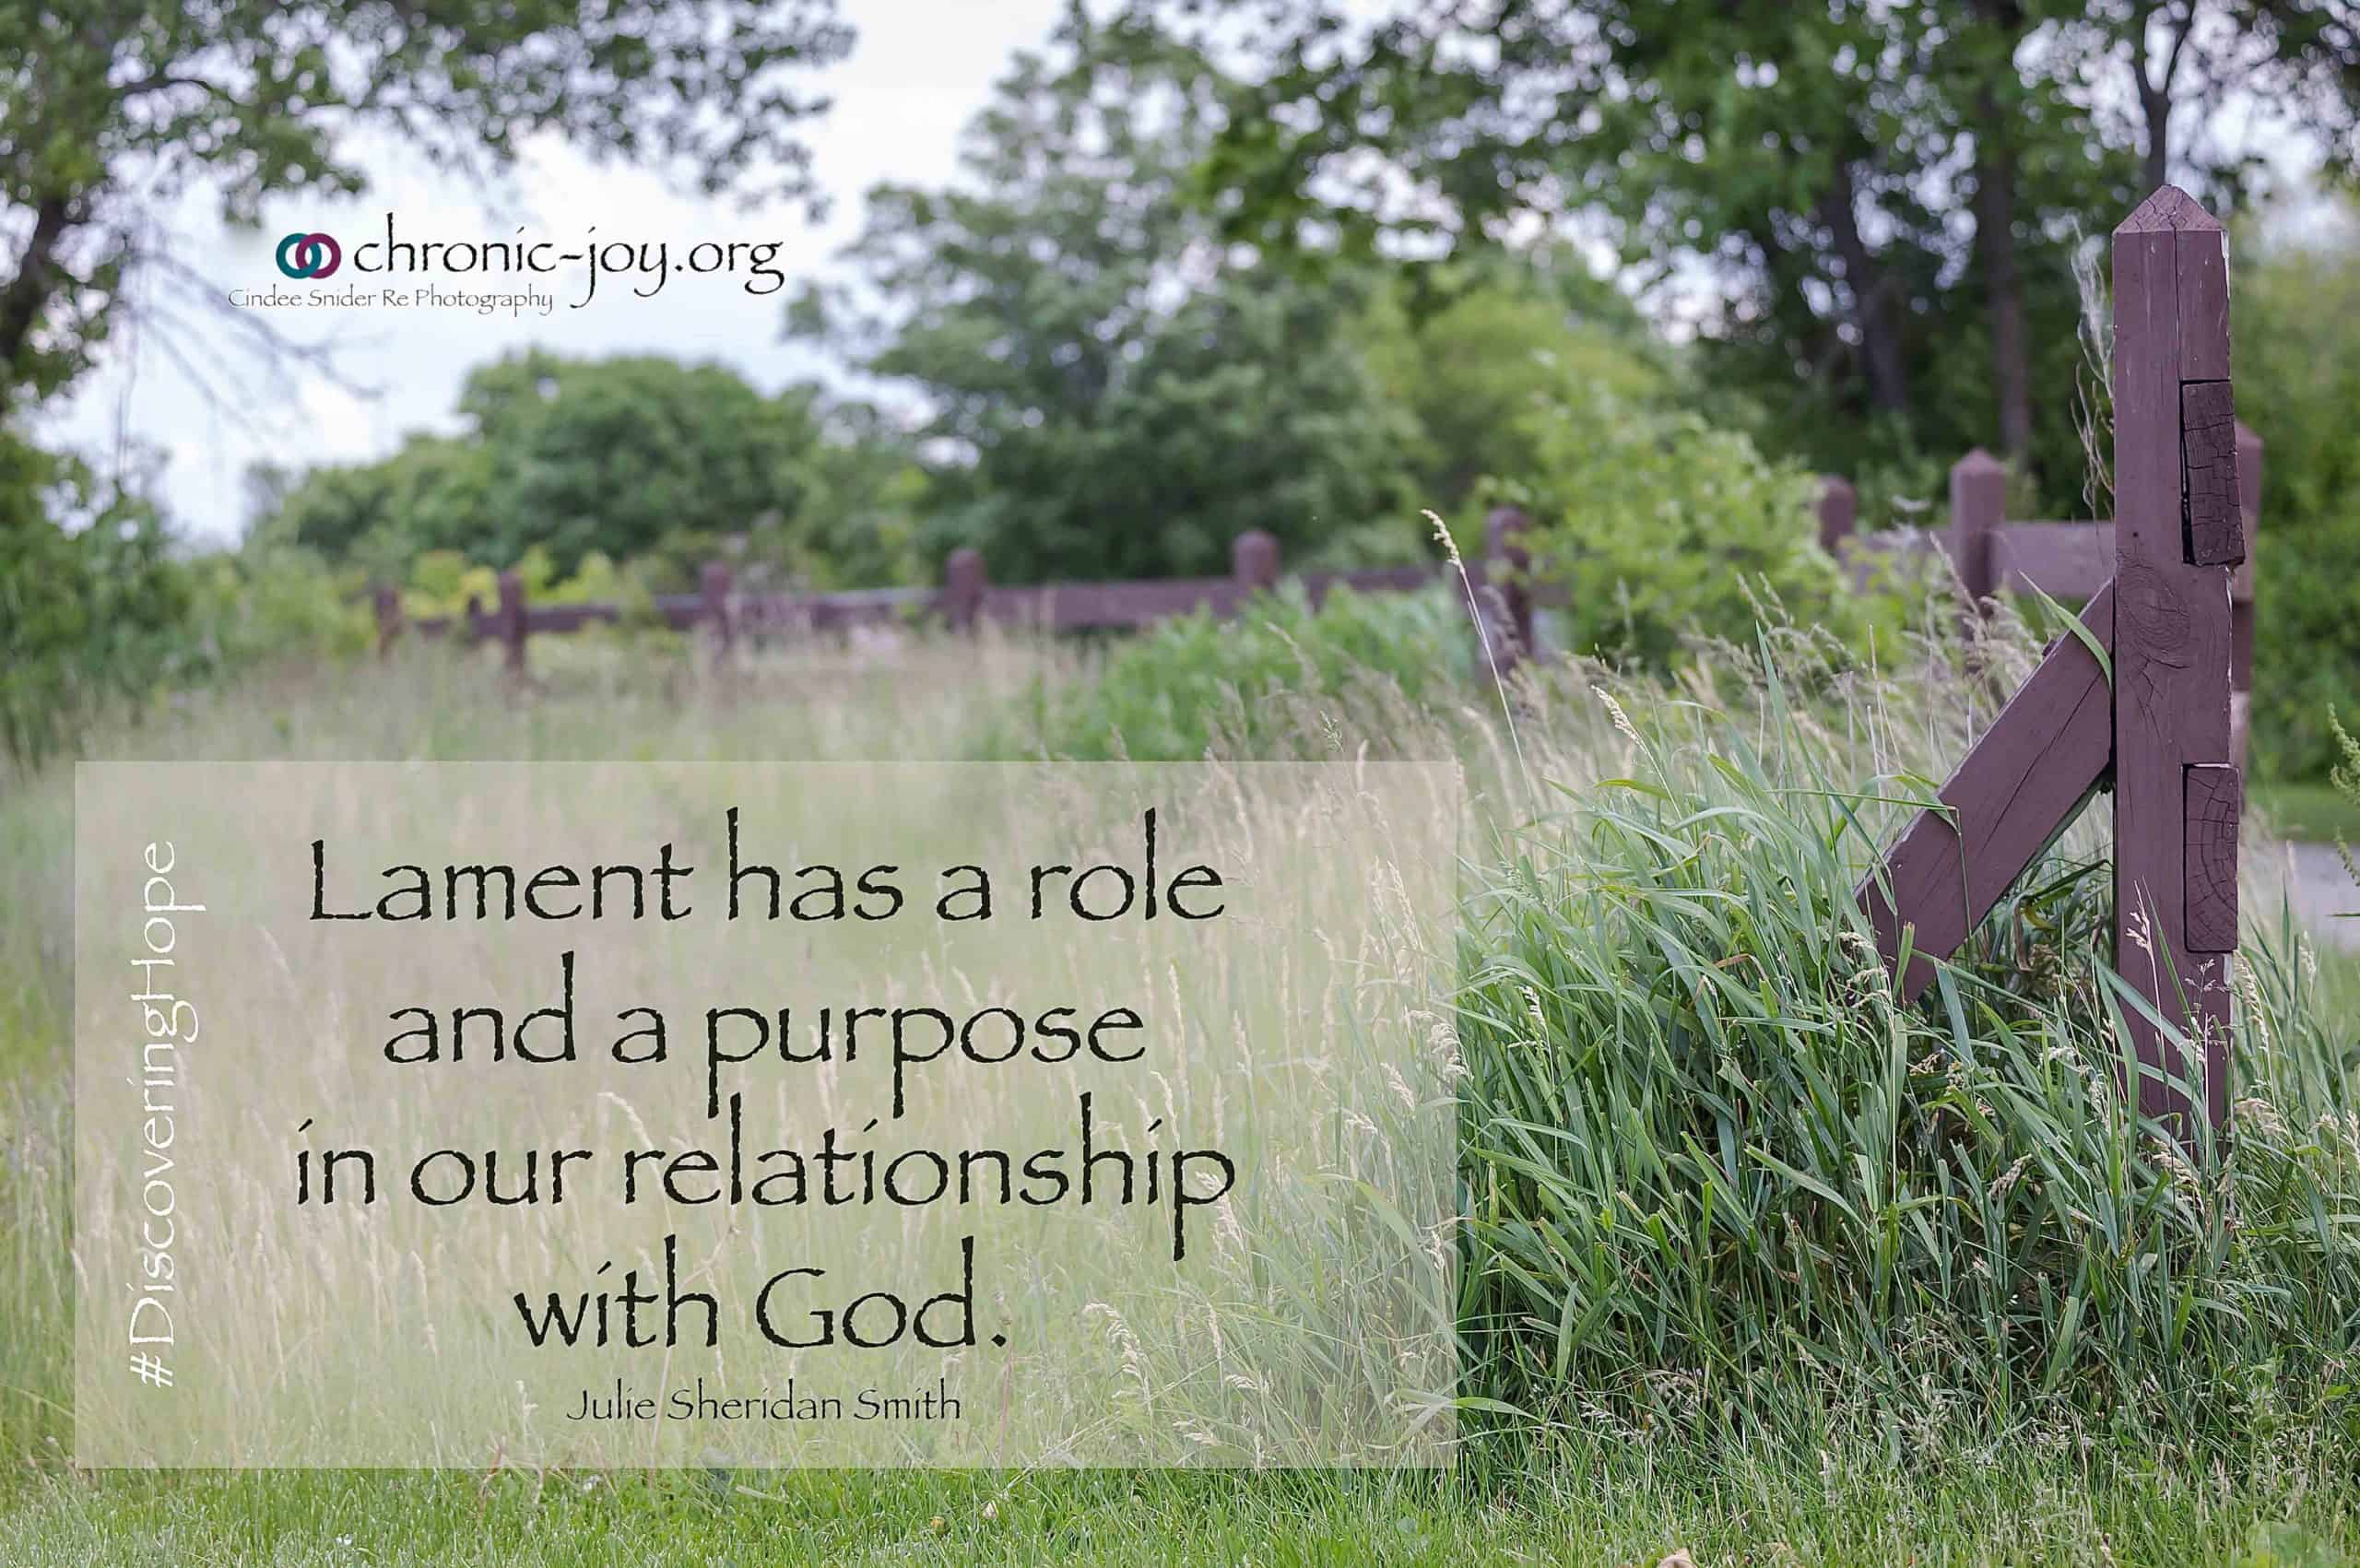 "Lament has a role and a purpose in our relationship with God." Julie Sheridan Smith